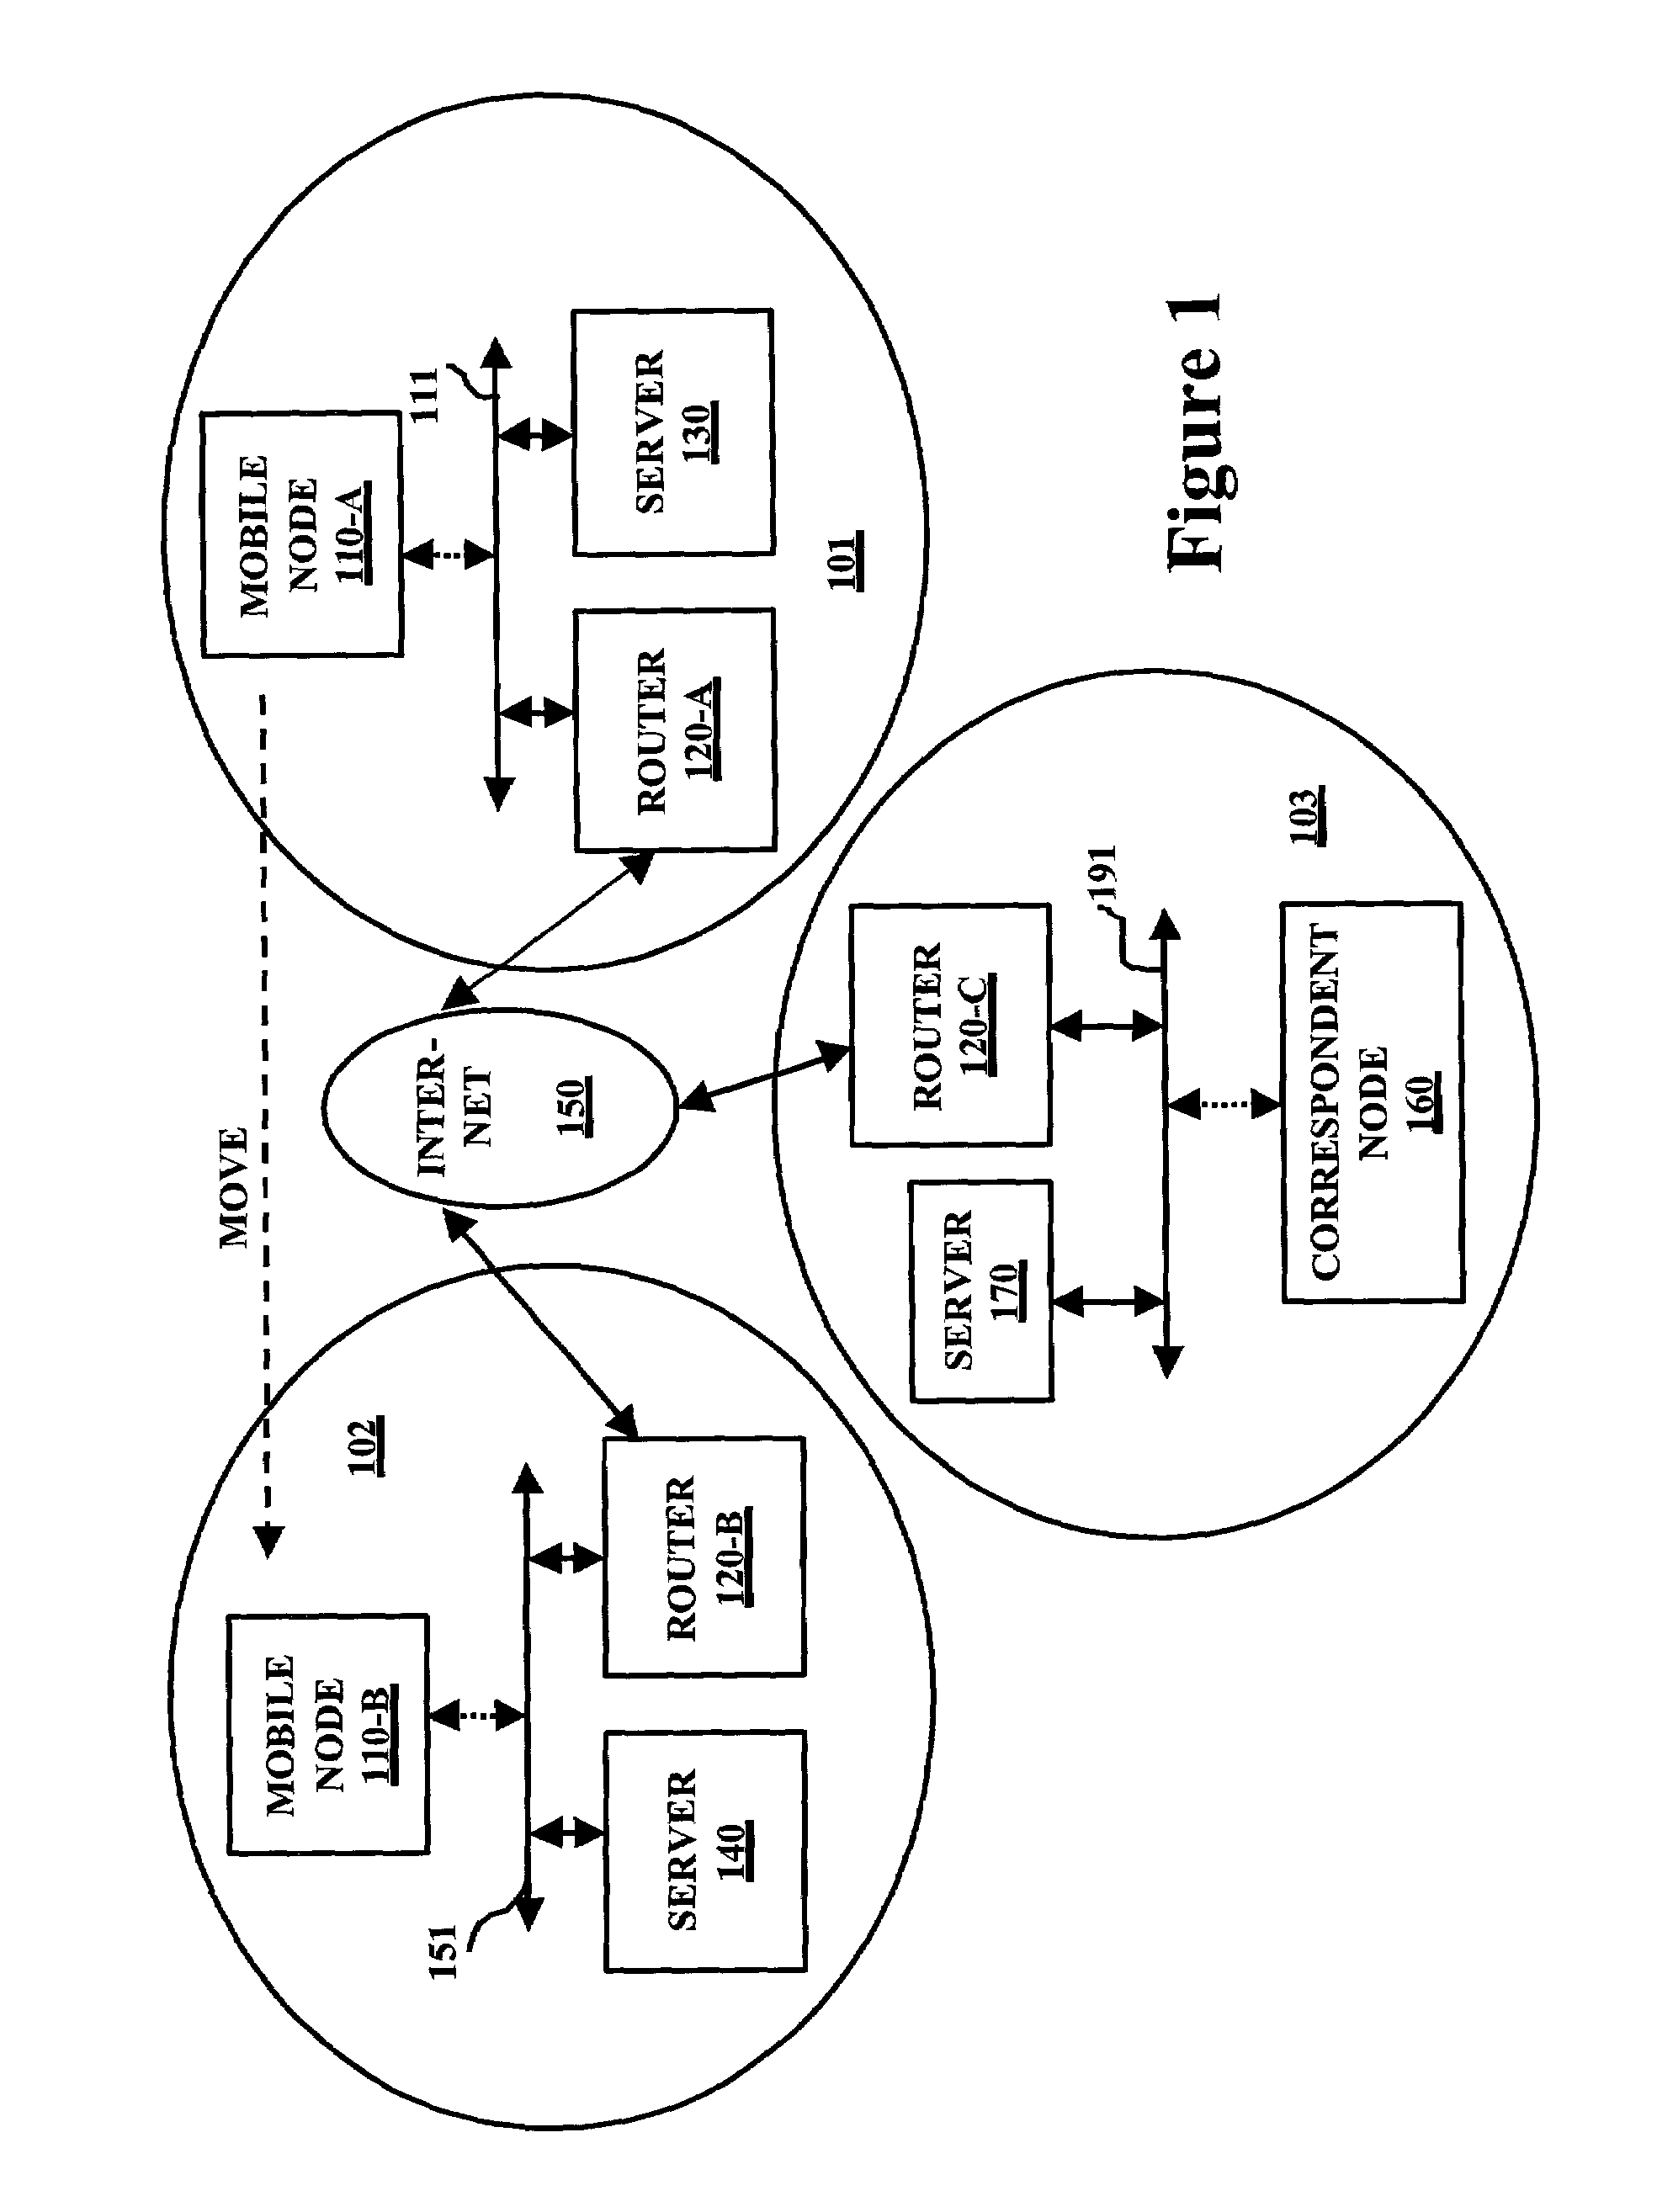 Maintaining session connectivity when a mobile node moves from one layer 3 network to another